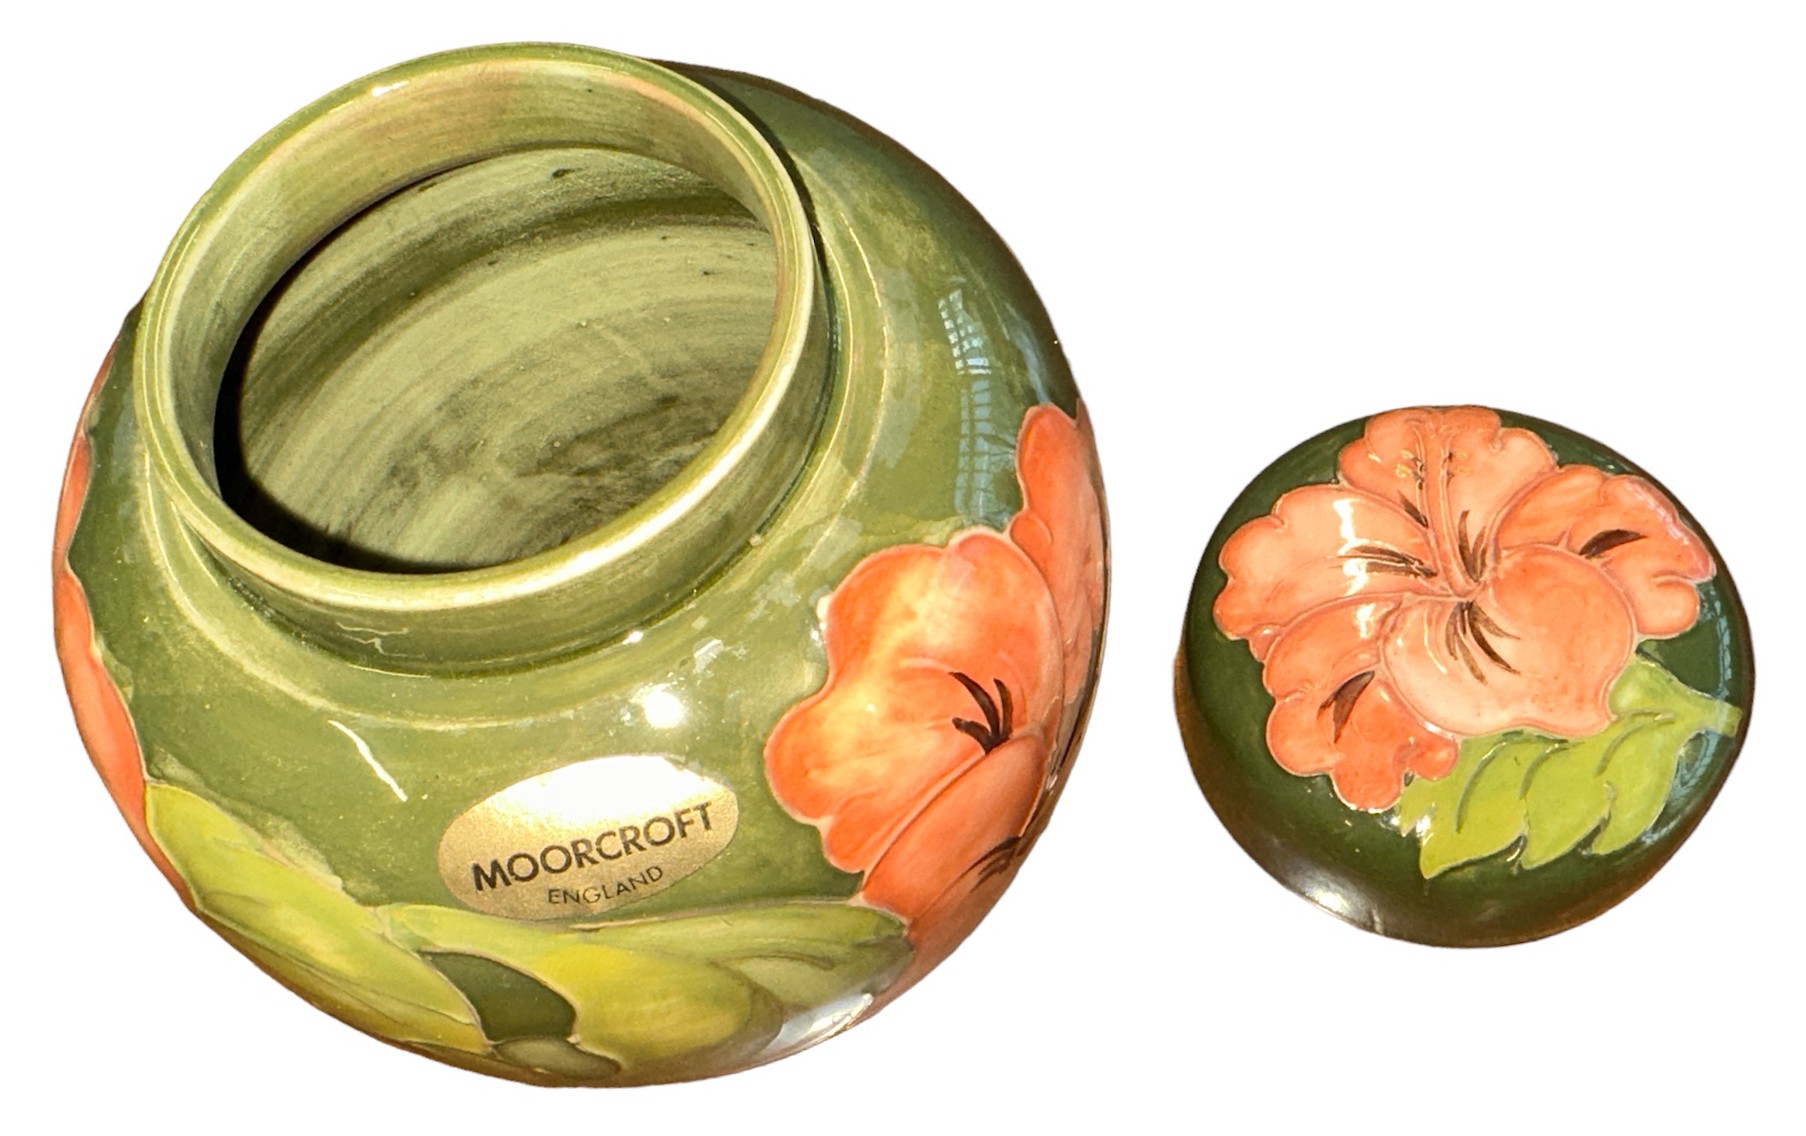 Moorcroft – A Moorcroft Hibiscus pattern ginger jar, WM painted initials and Made in England - Image 3 of 4